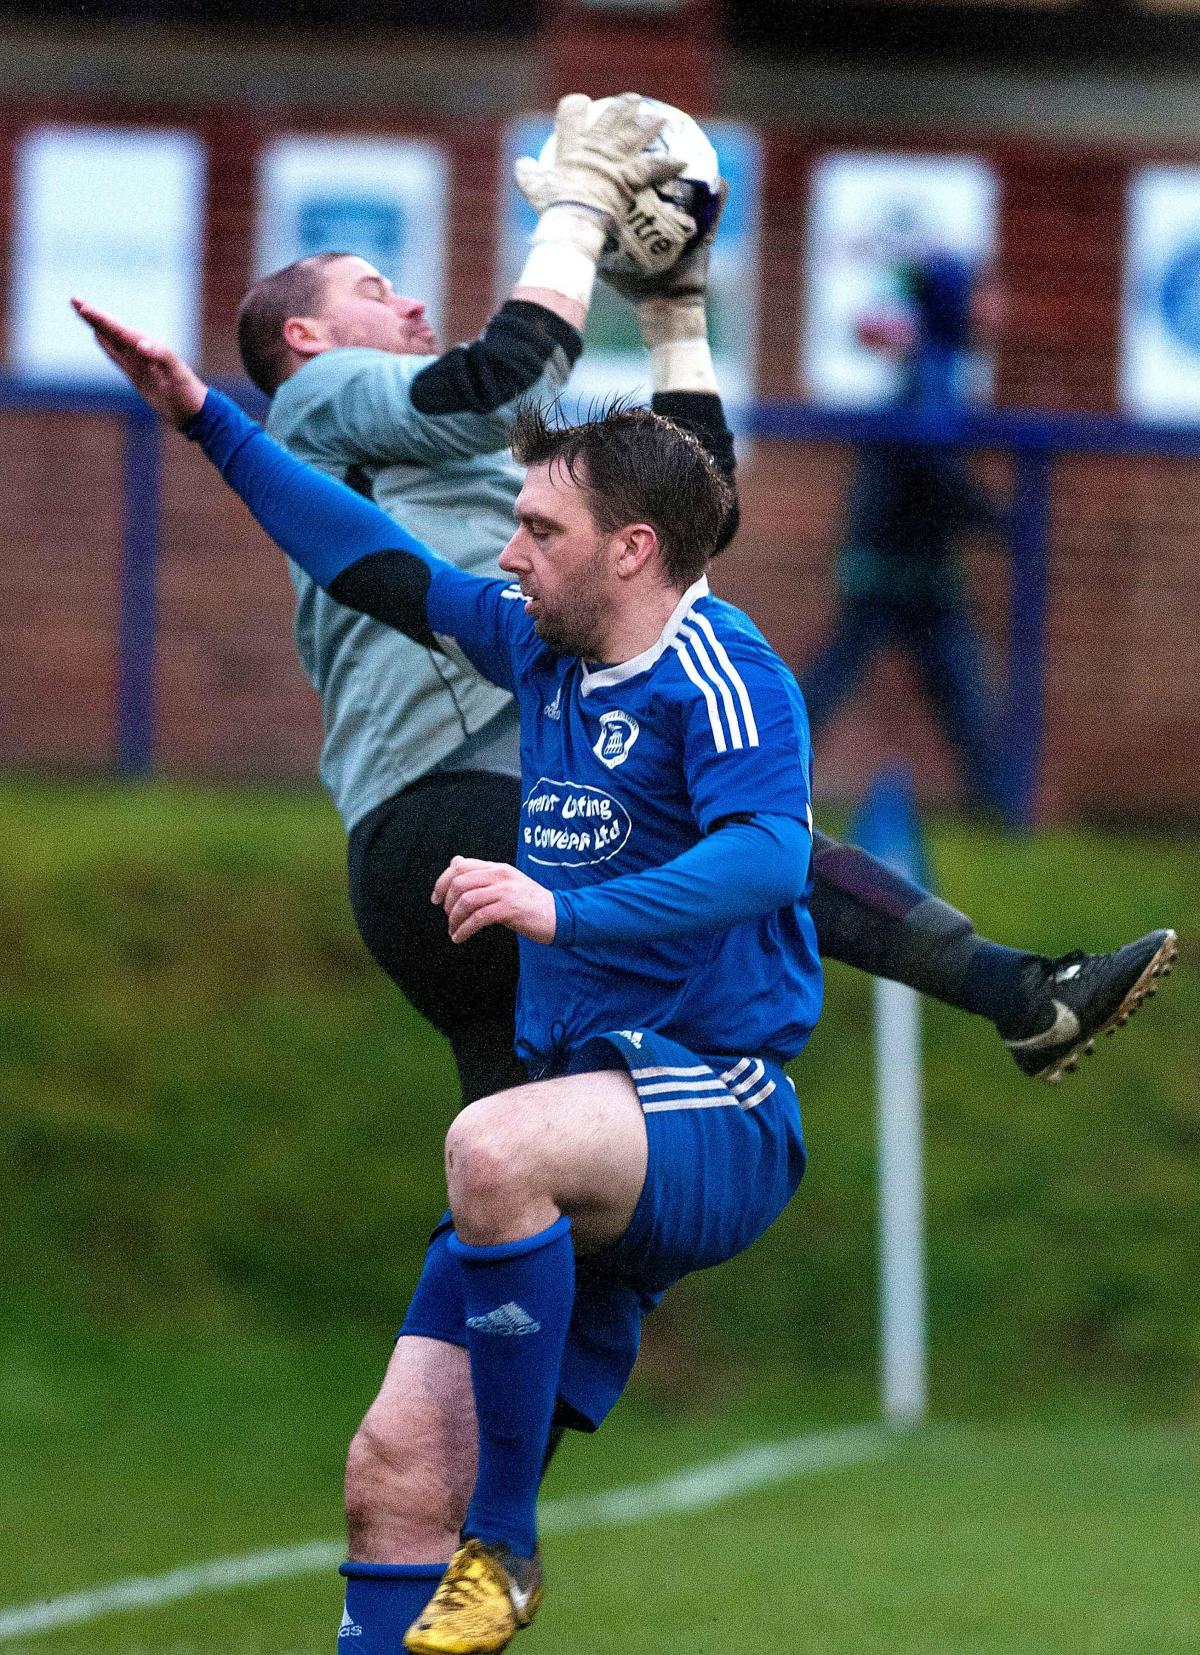 Andover Town's double goal scorer Zach Glasspool challenges the Fawley goalkeeper in his side's 3-1 win at The Portway Stadium - Picture Andy Brooks